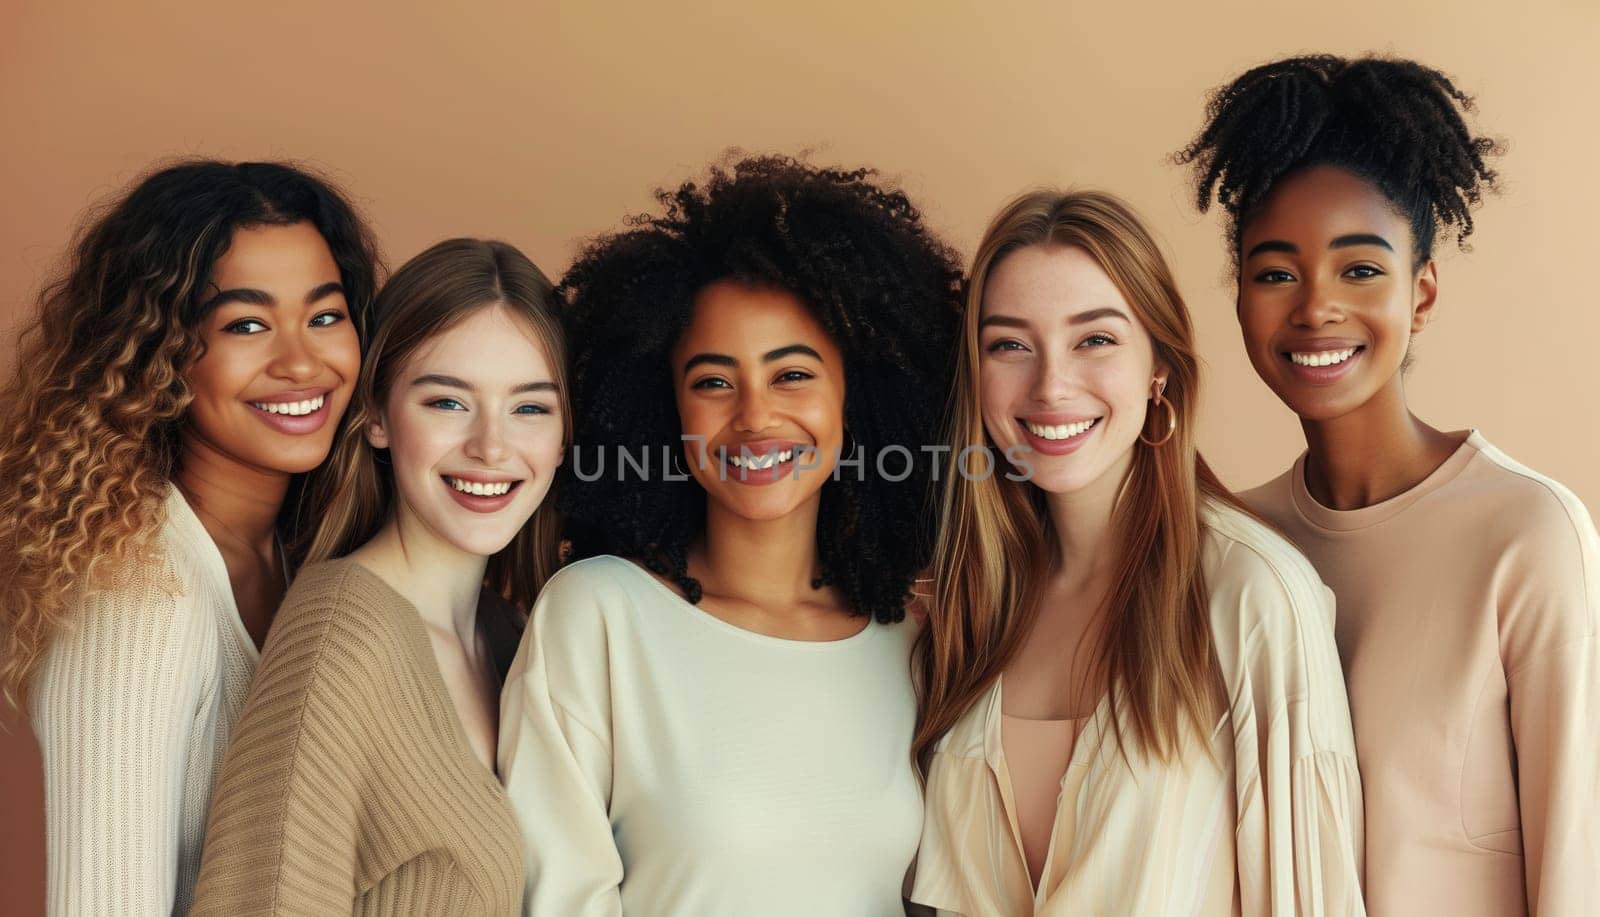 Group of beautiful happy smiling multiethnic young women together, five diverse cheerful girlfriends posing on brown studio background